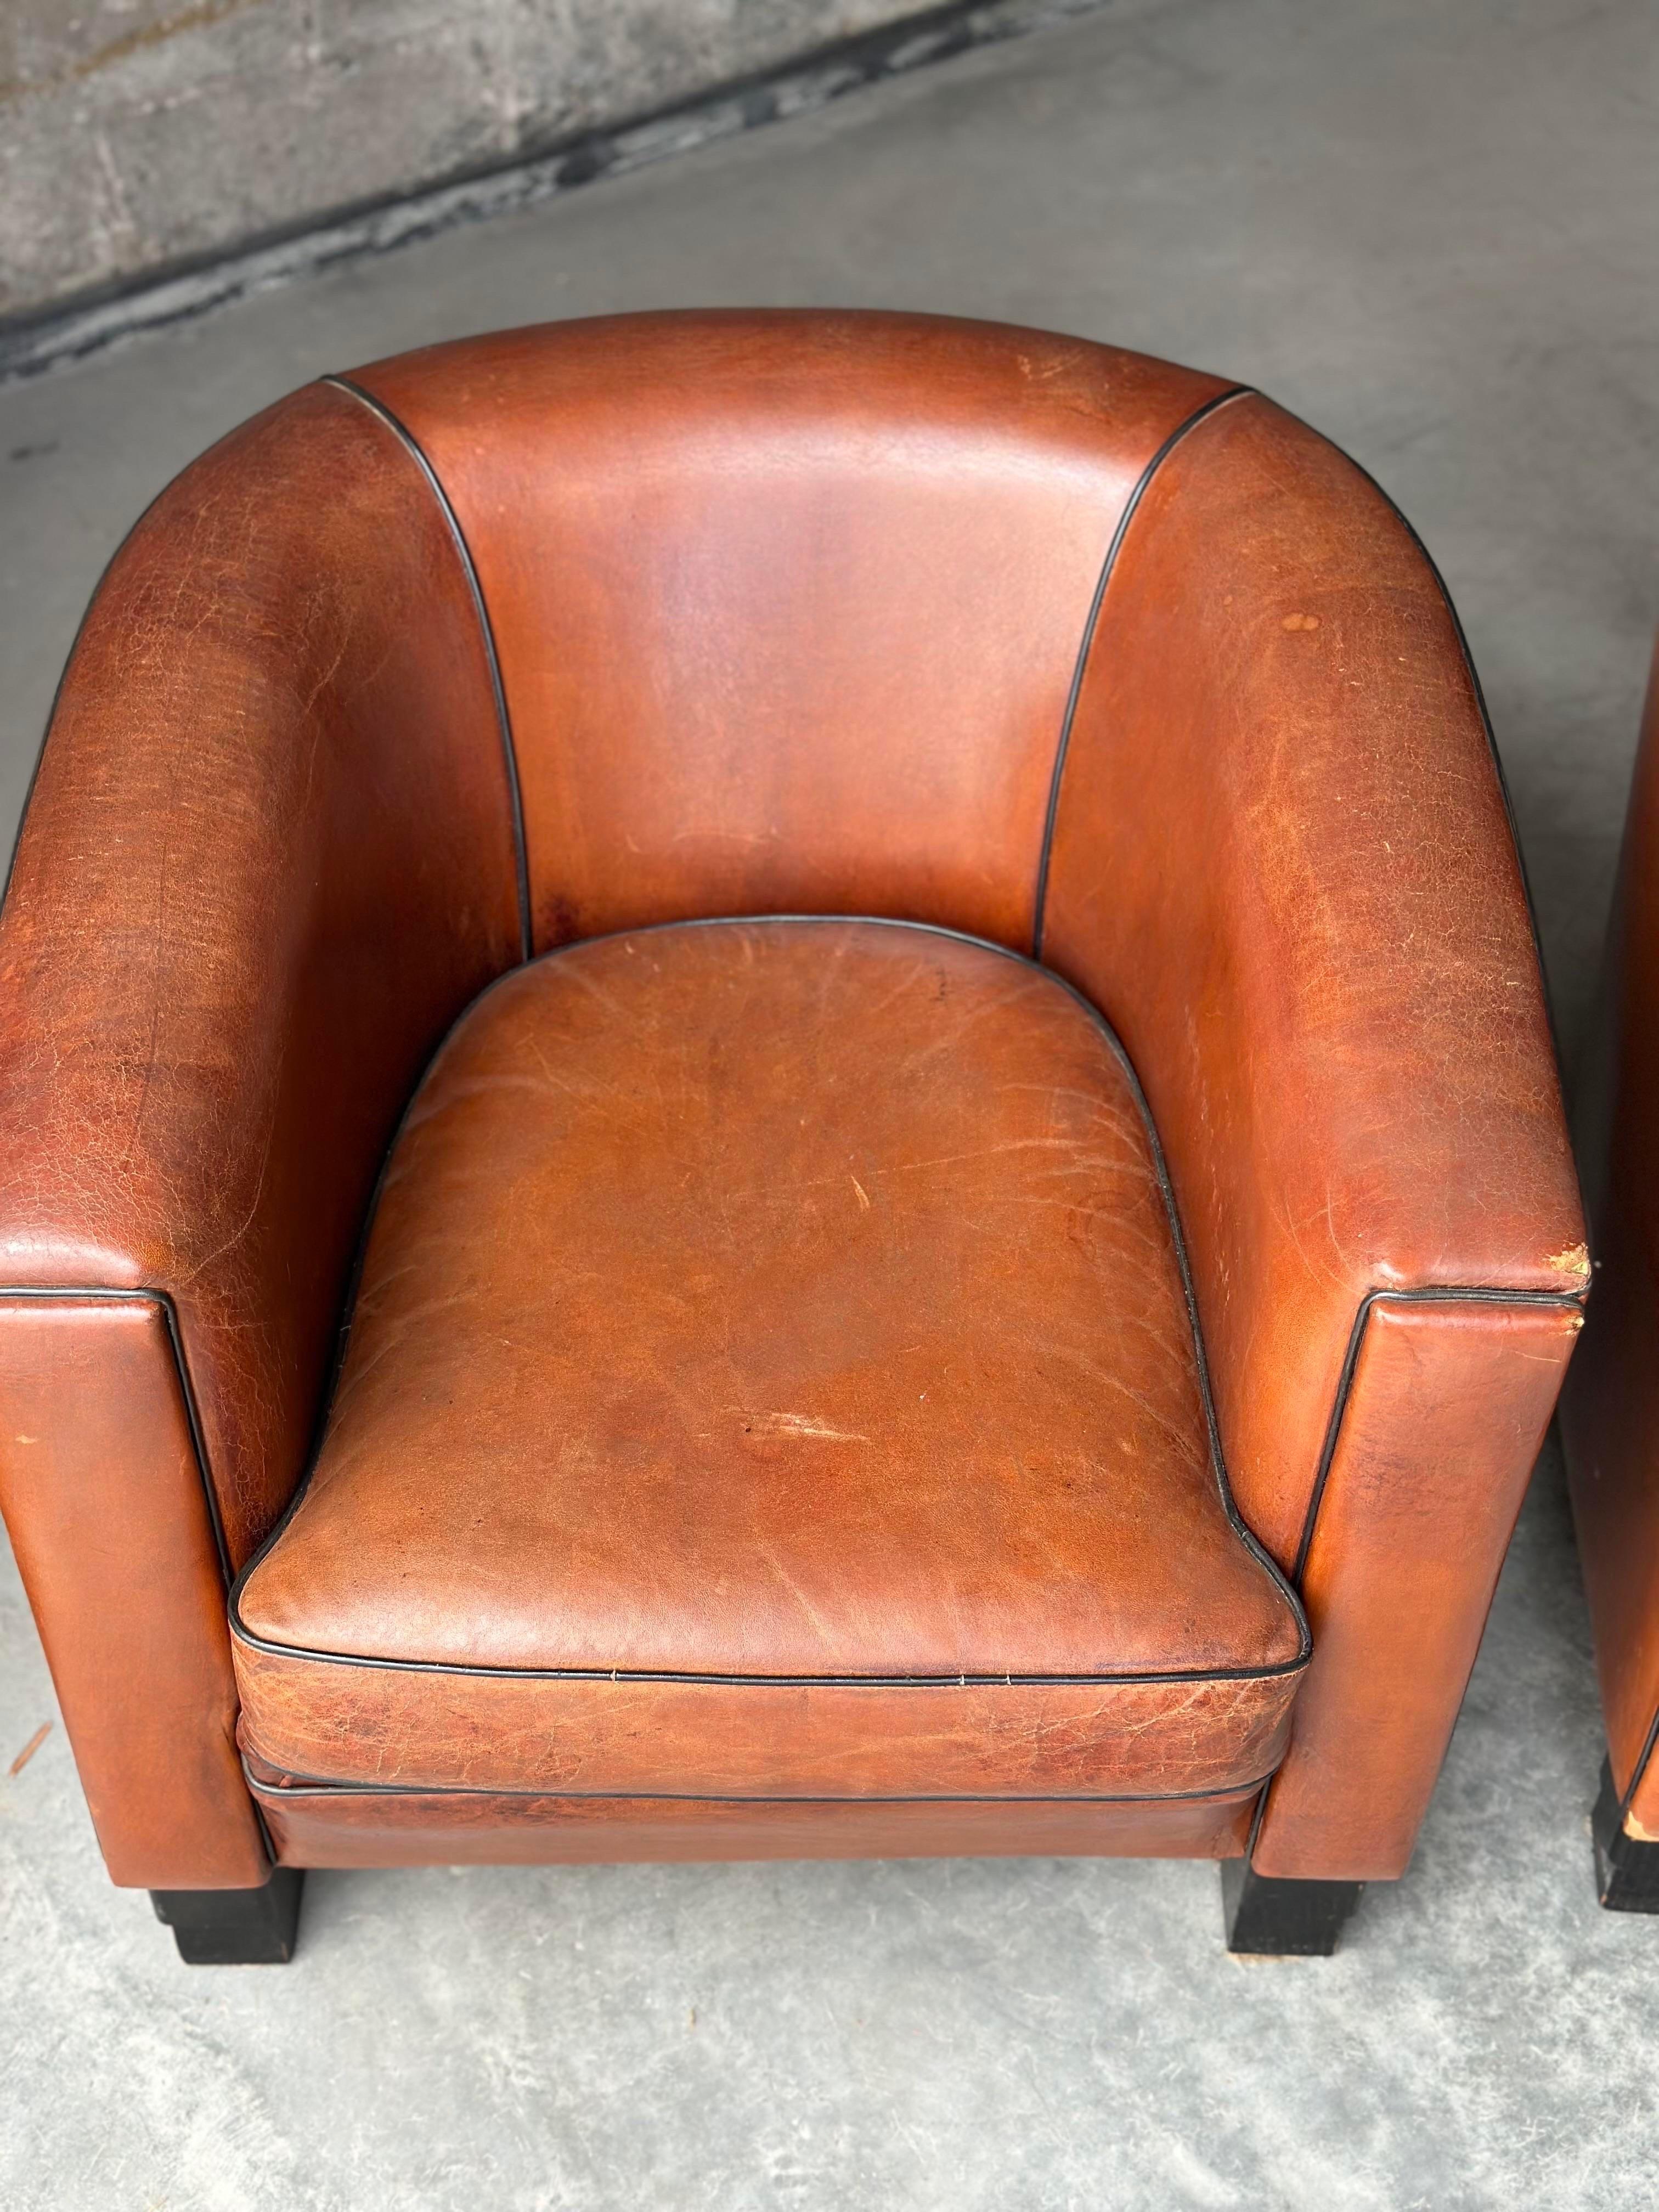 20th Century Dutch Sheep’s Leather Club Chairs - a Pair For Sale